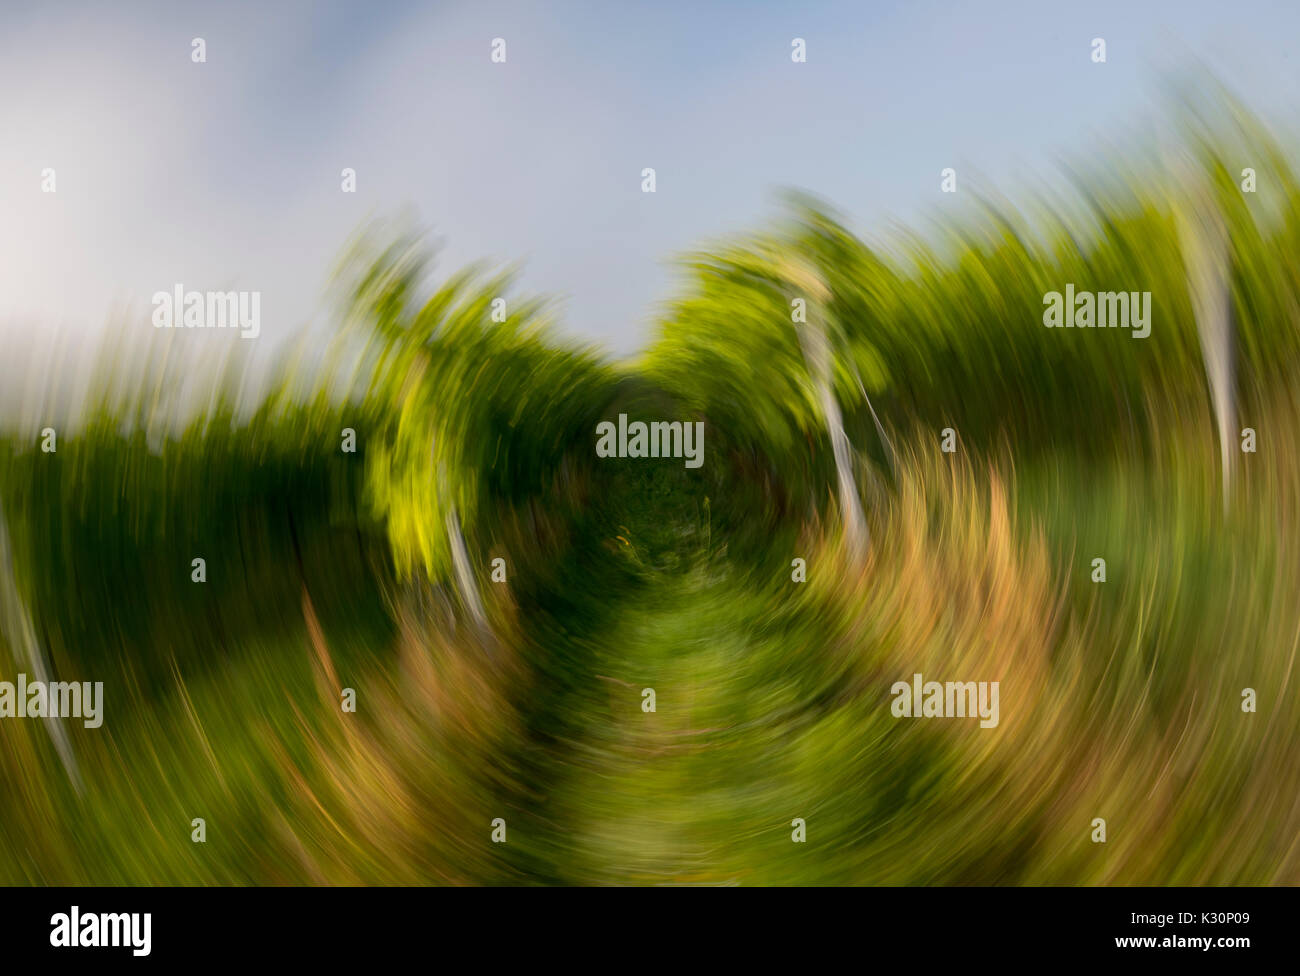 Photographic technique, intentional camera movement, the circular effect caused by rotating the camera at a low shutter speed Stock Photo